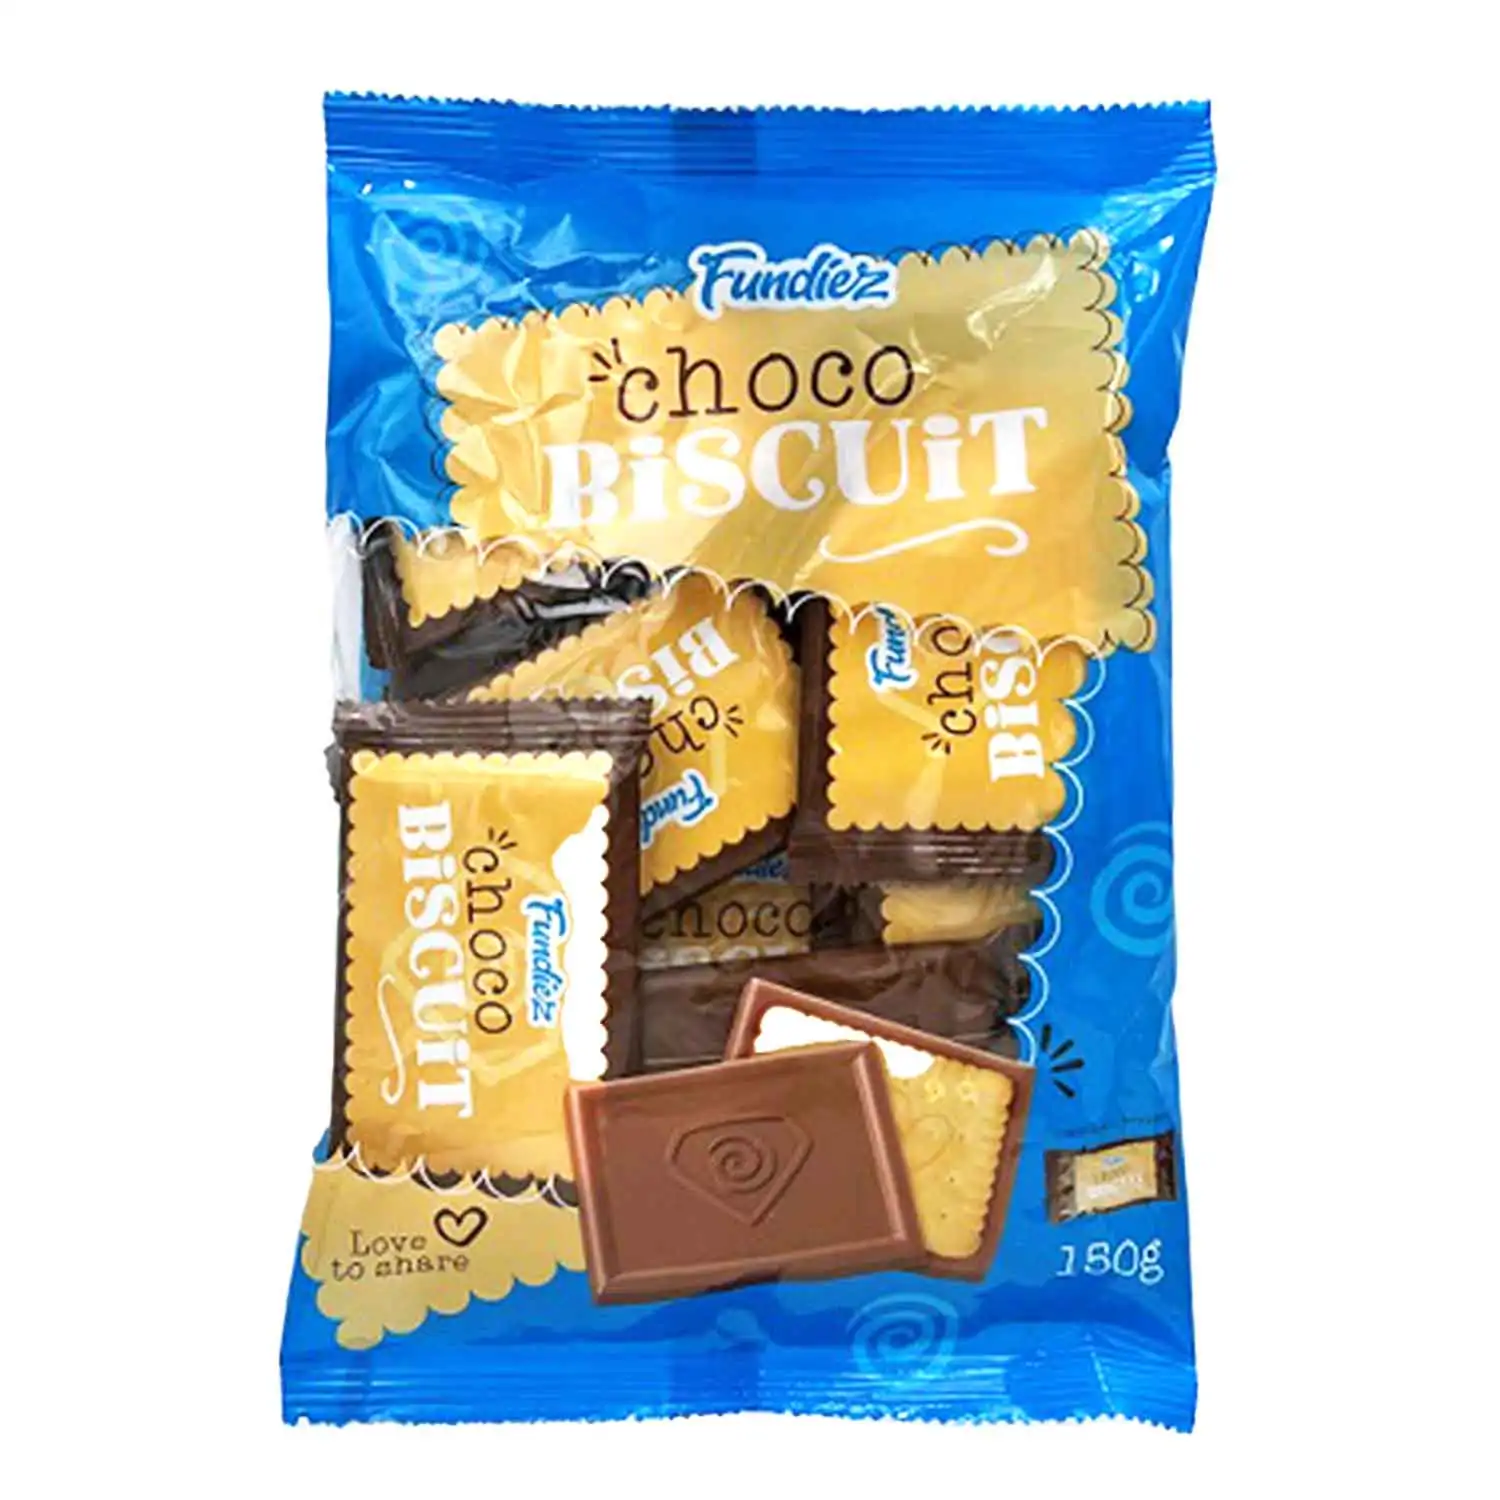 Fundiez choco biscuit 12x12,5g - Buy at Real Tobacco